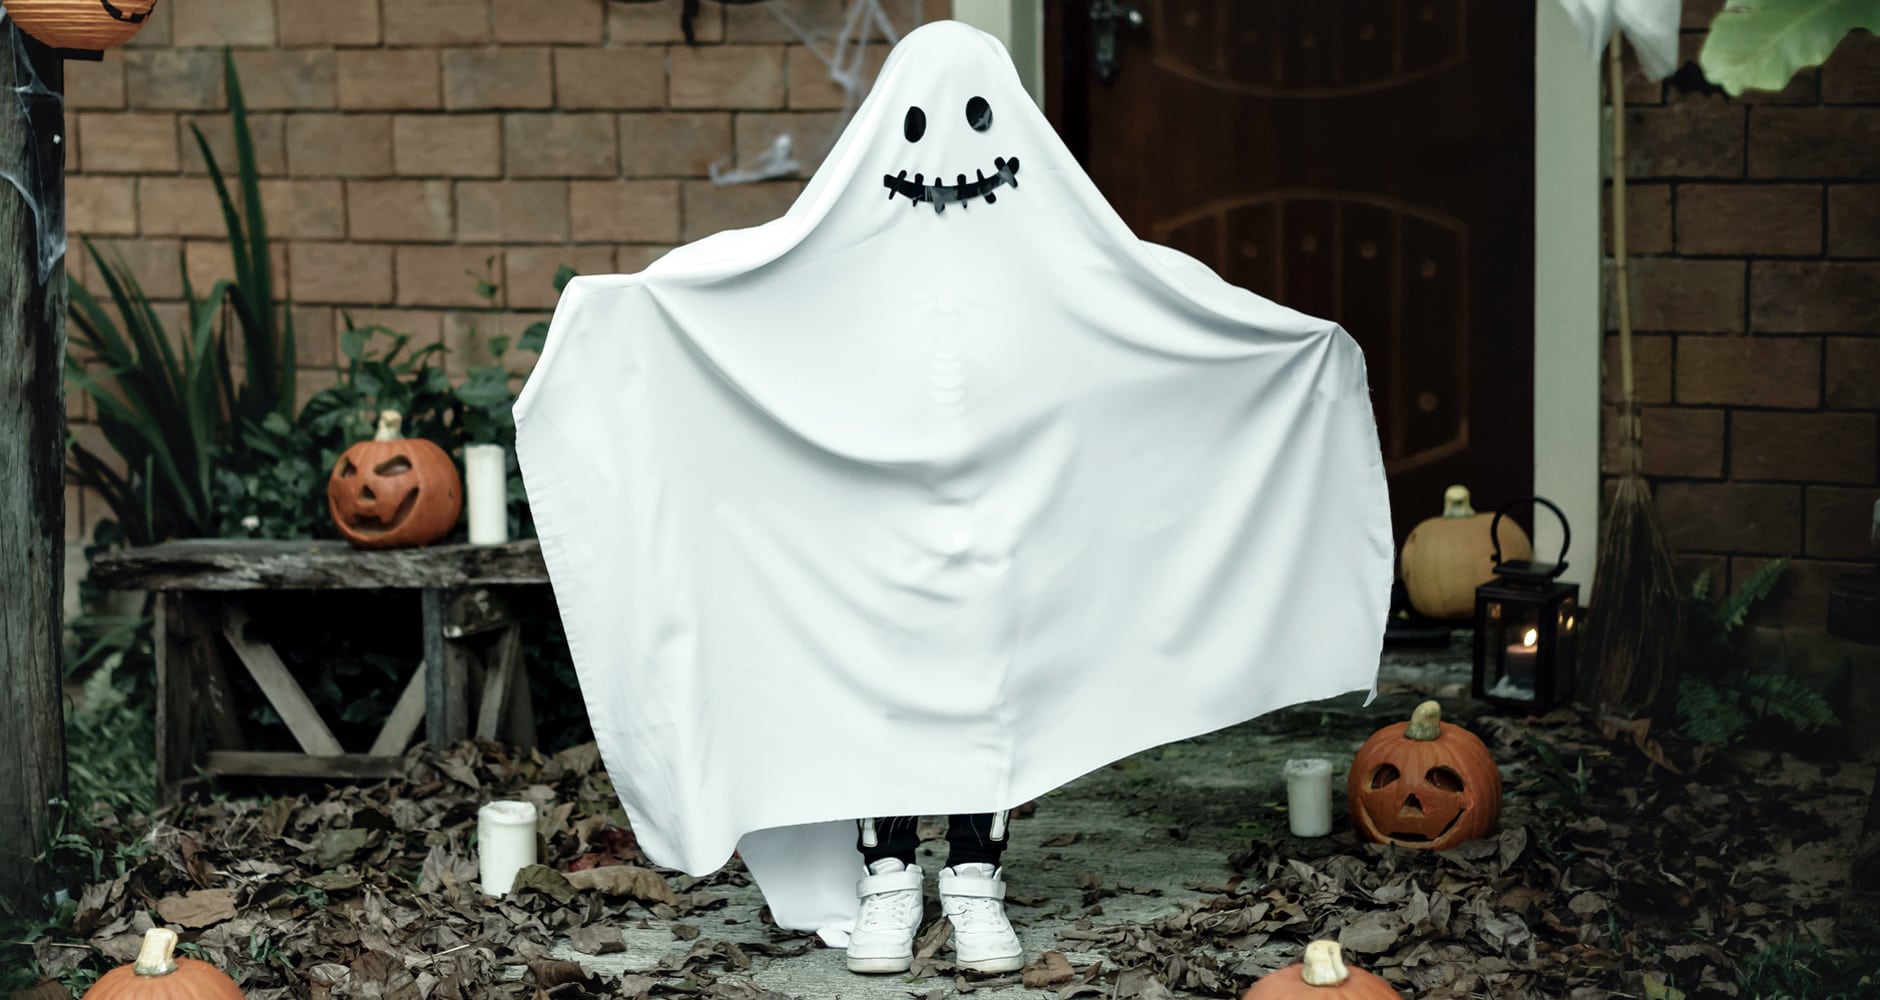 Halloween weather forecast - image of a ghost decoration next to a house